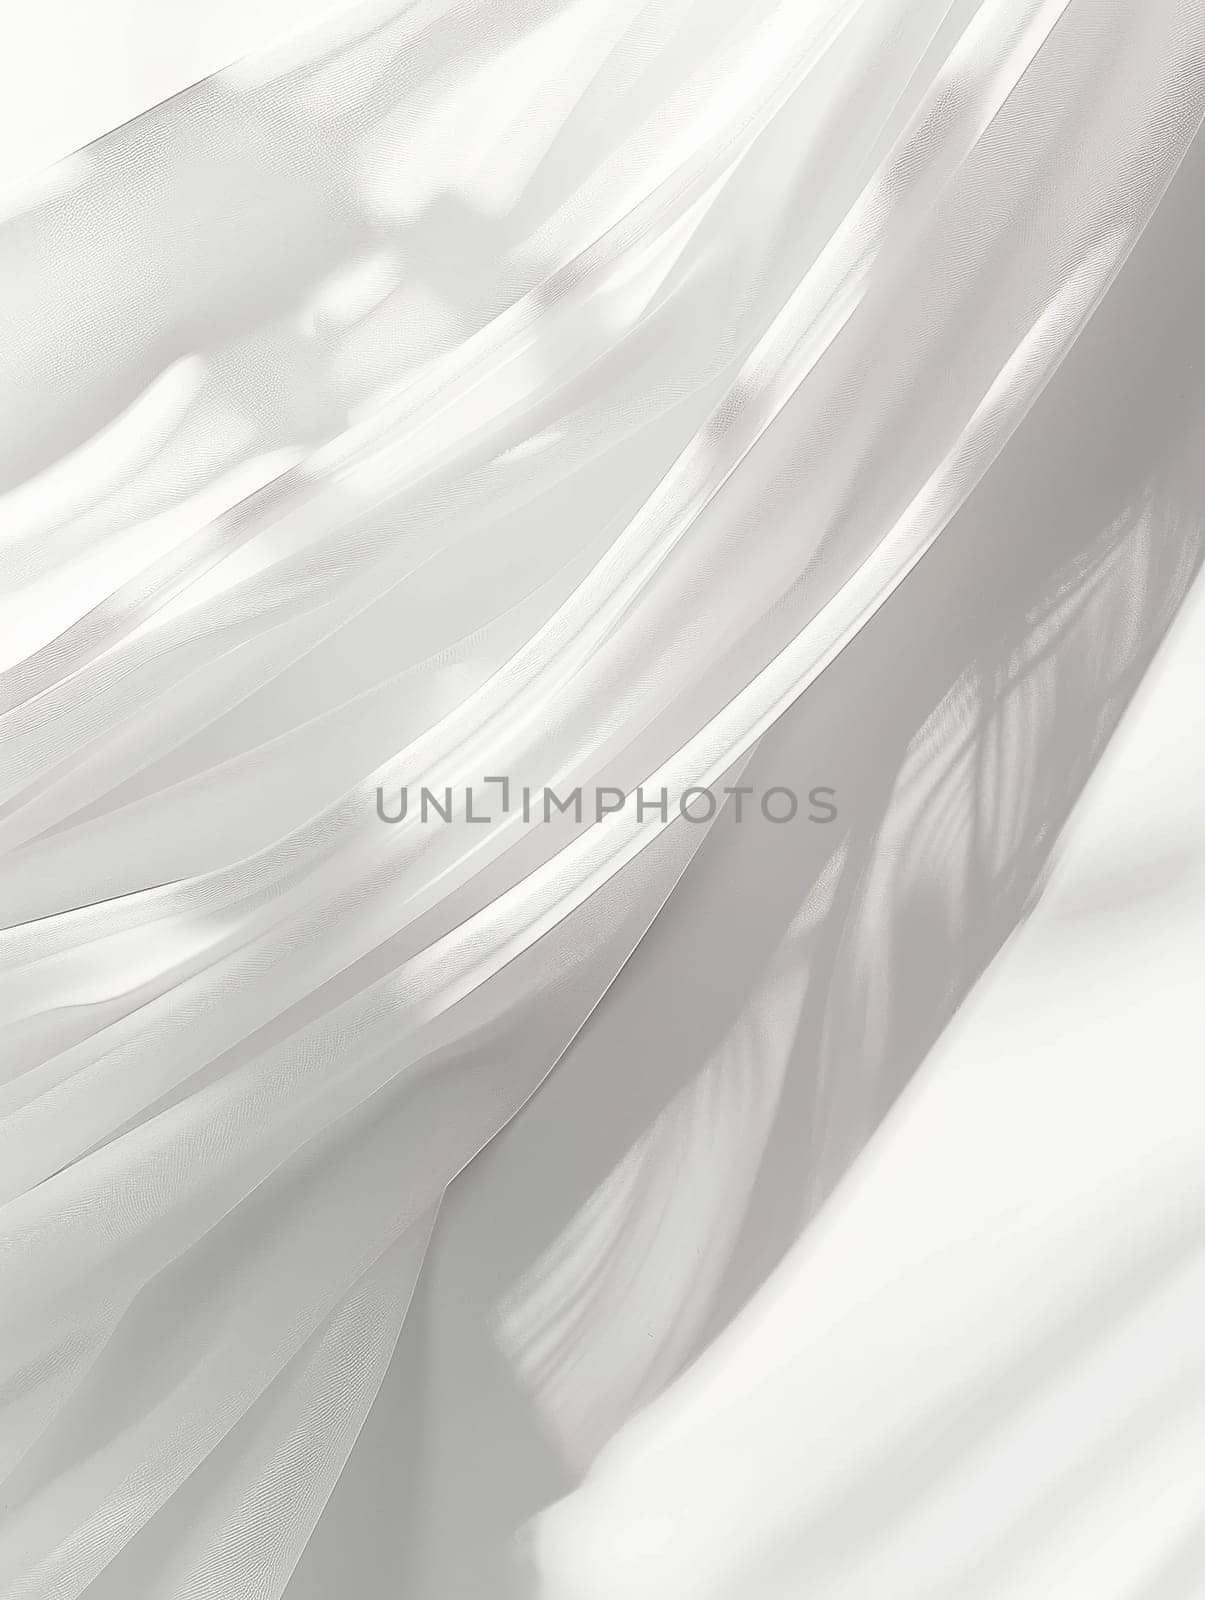 A white background with a series of white lines by itchaznong